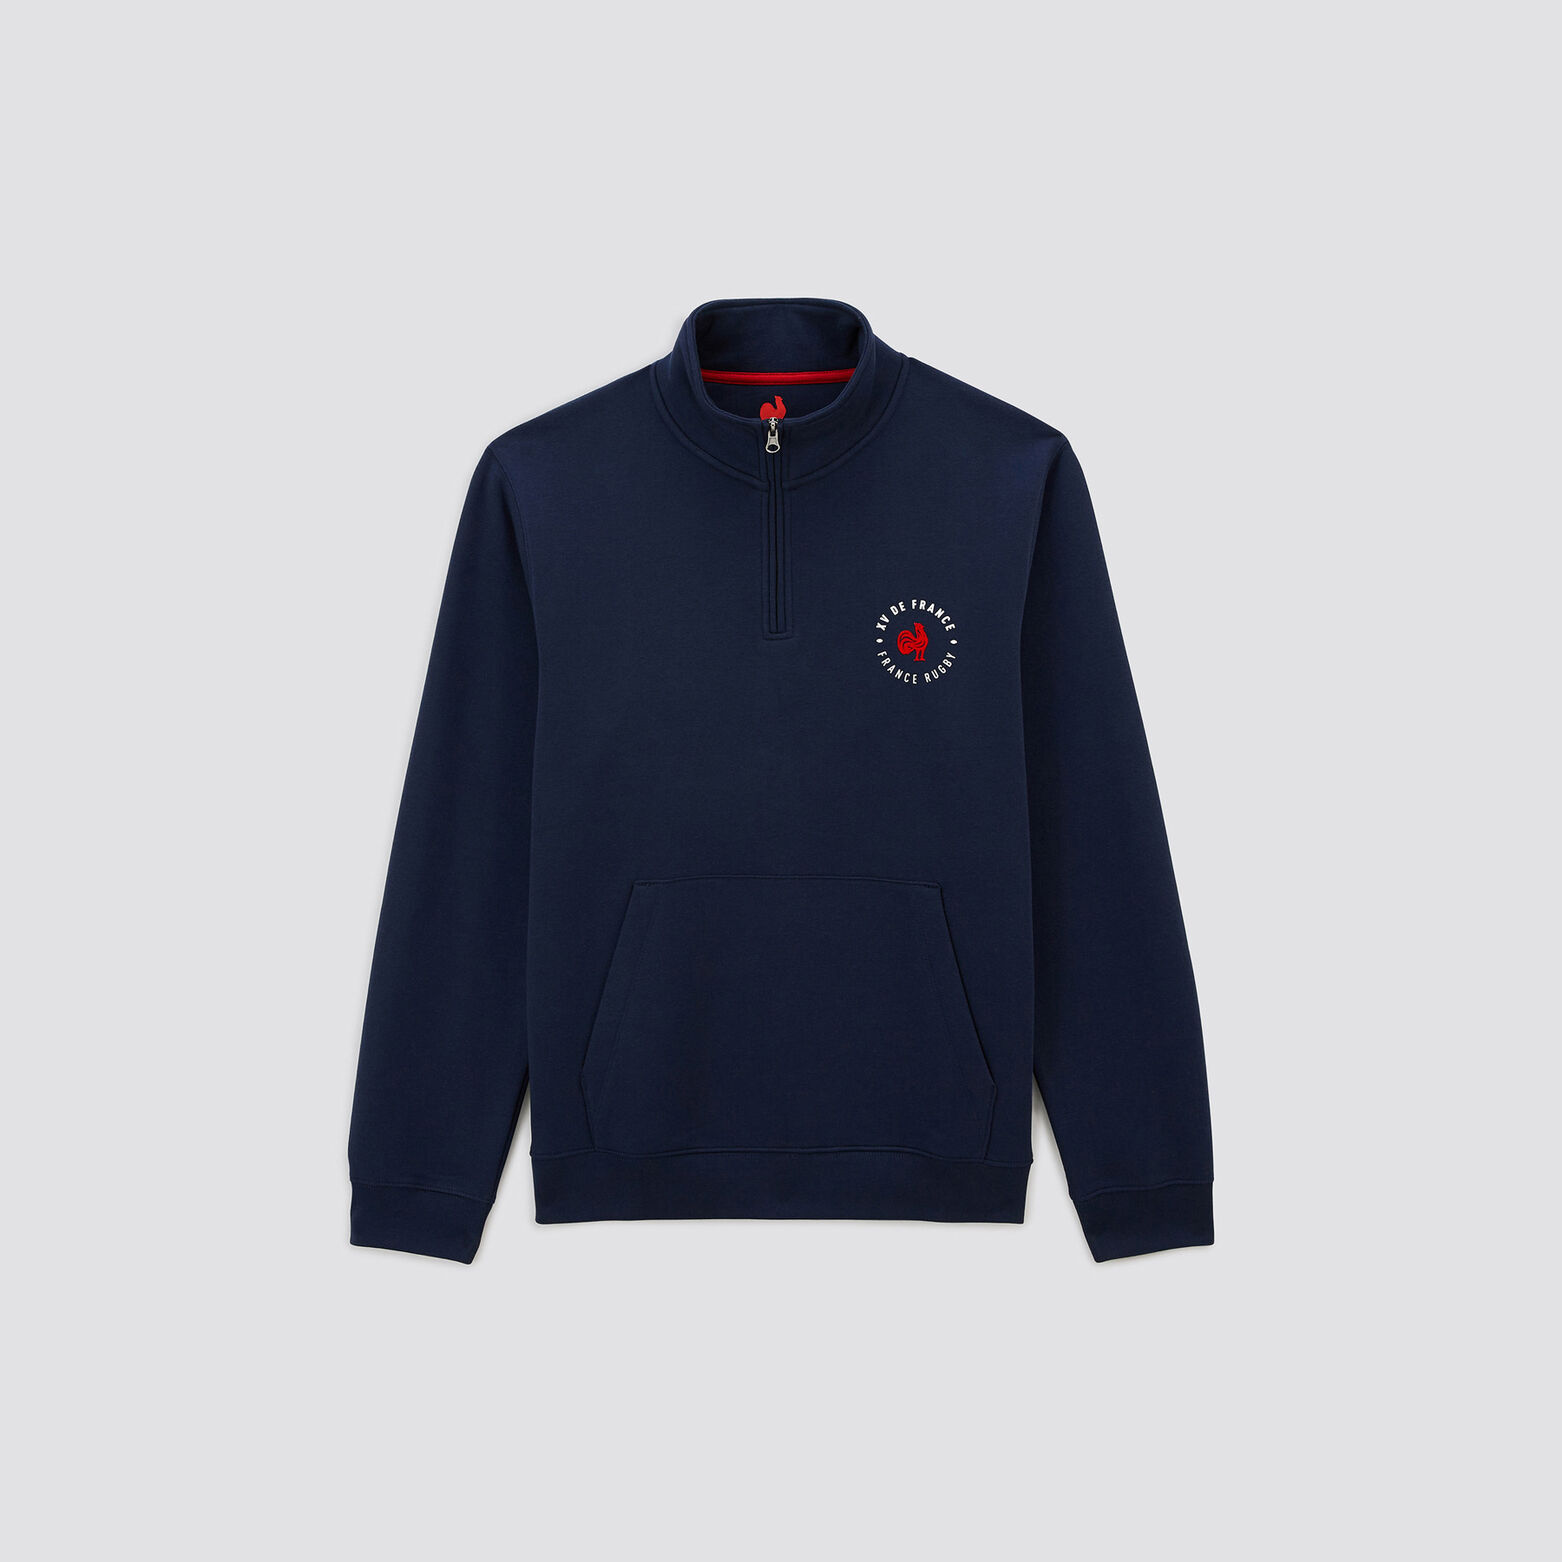 Sweat zip licence France rugby